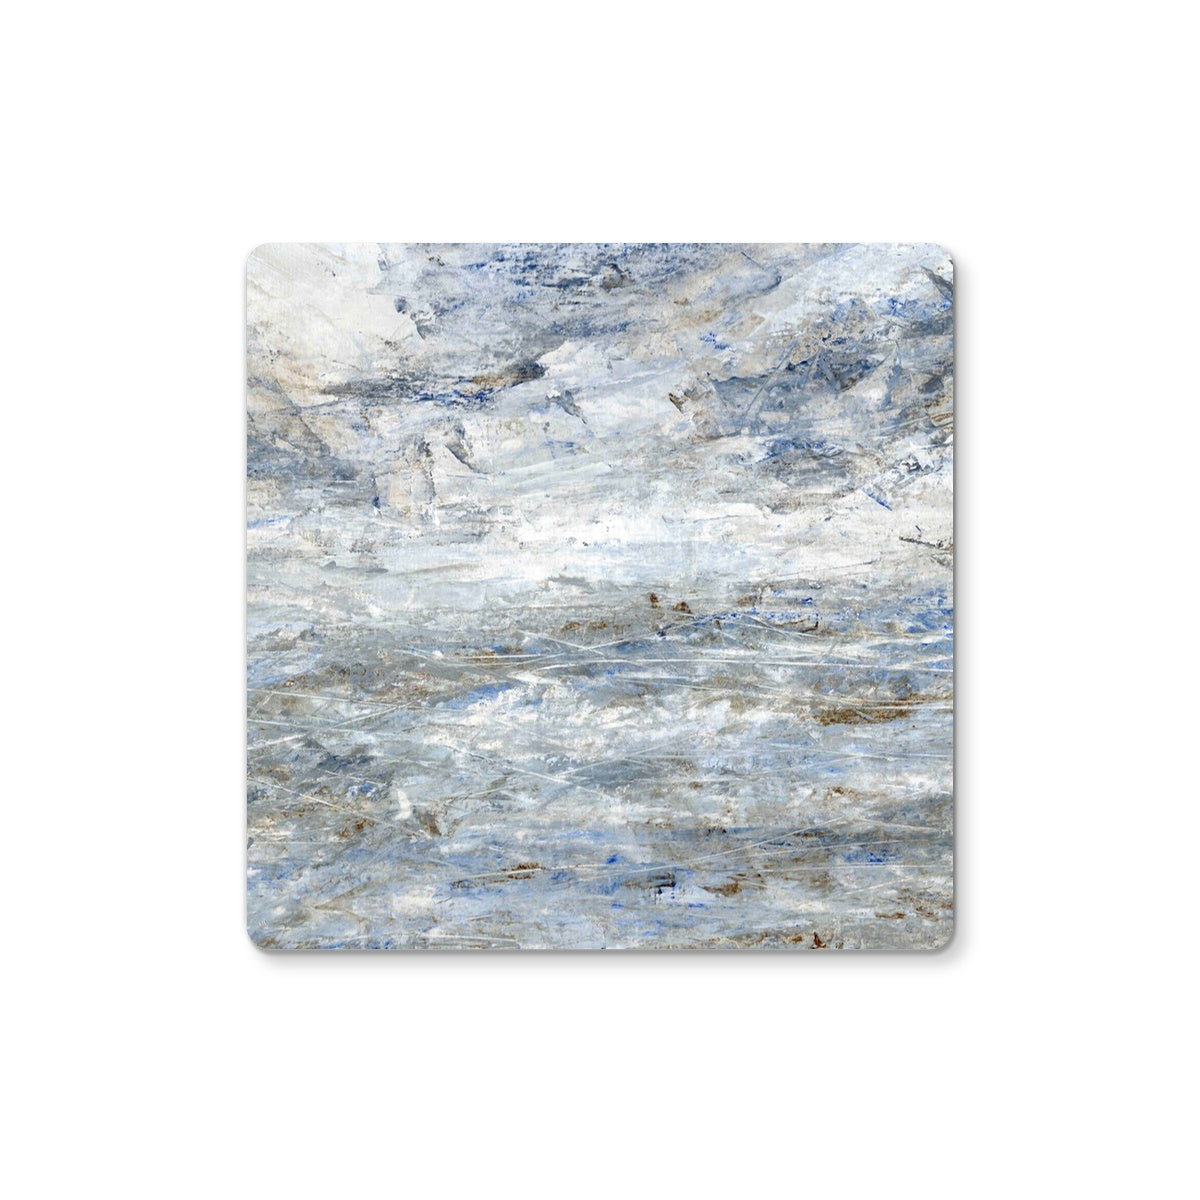 Grey Abstract Seascape Coasters - Ocean Coastal Decor - Grey Home Accents - Neutral Colour Drinks Coasters - New Home Housewarming Gift Ideas